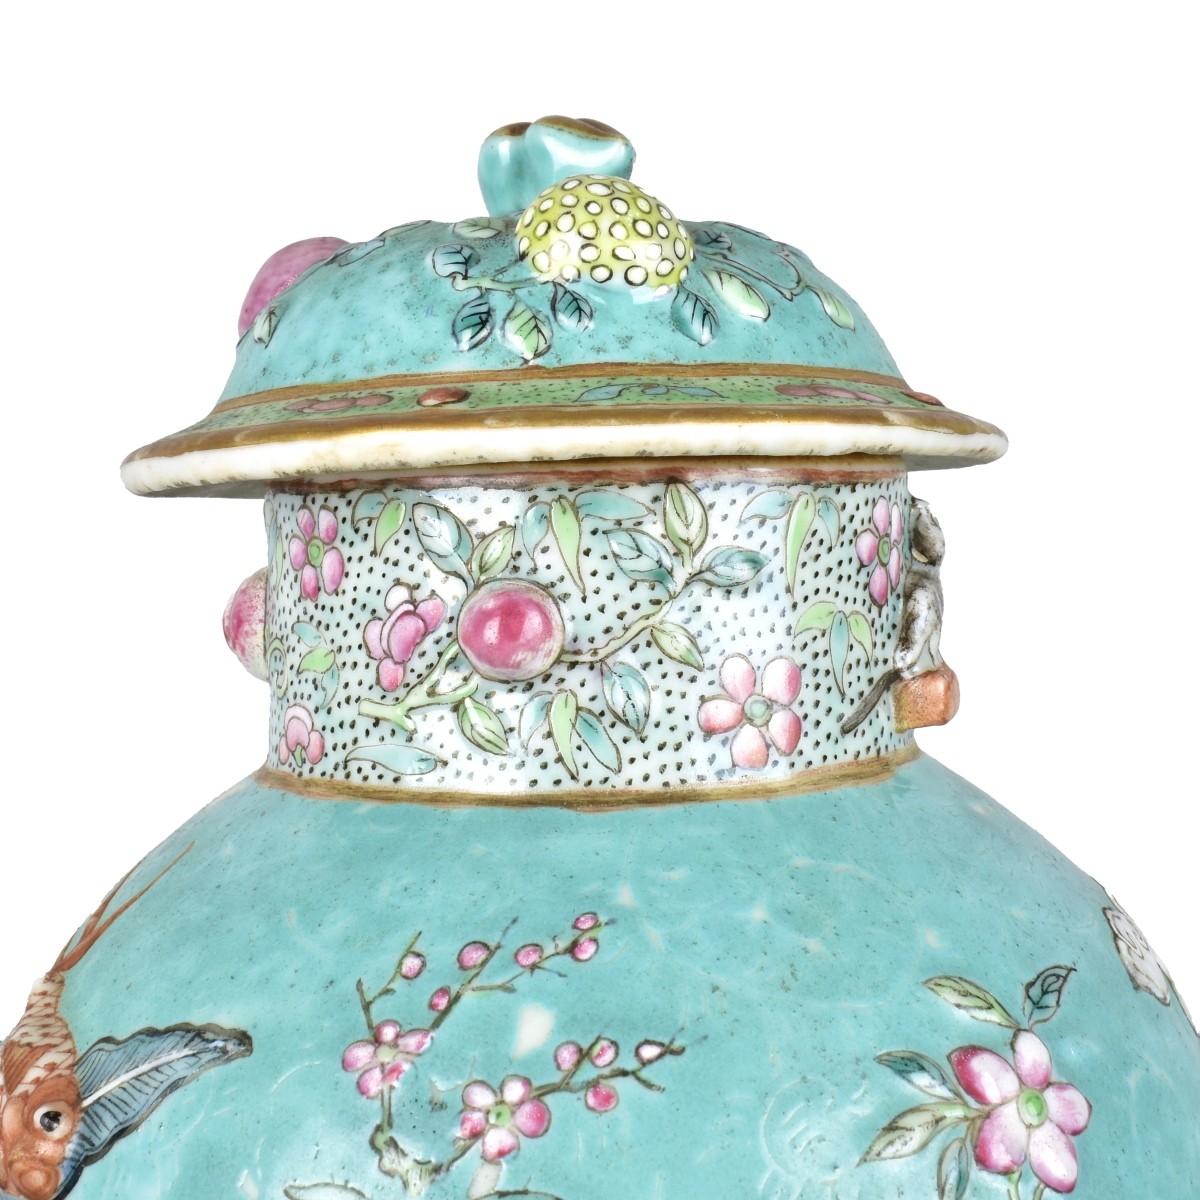 Chinese Famille Rose Covered Jar